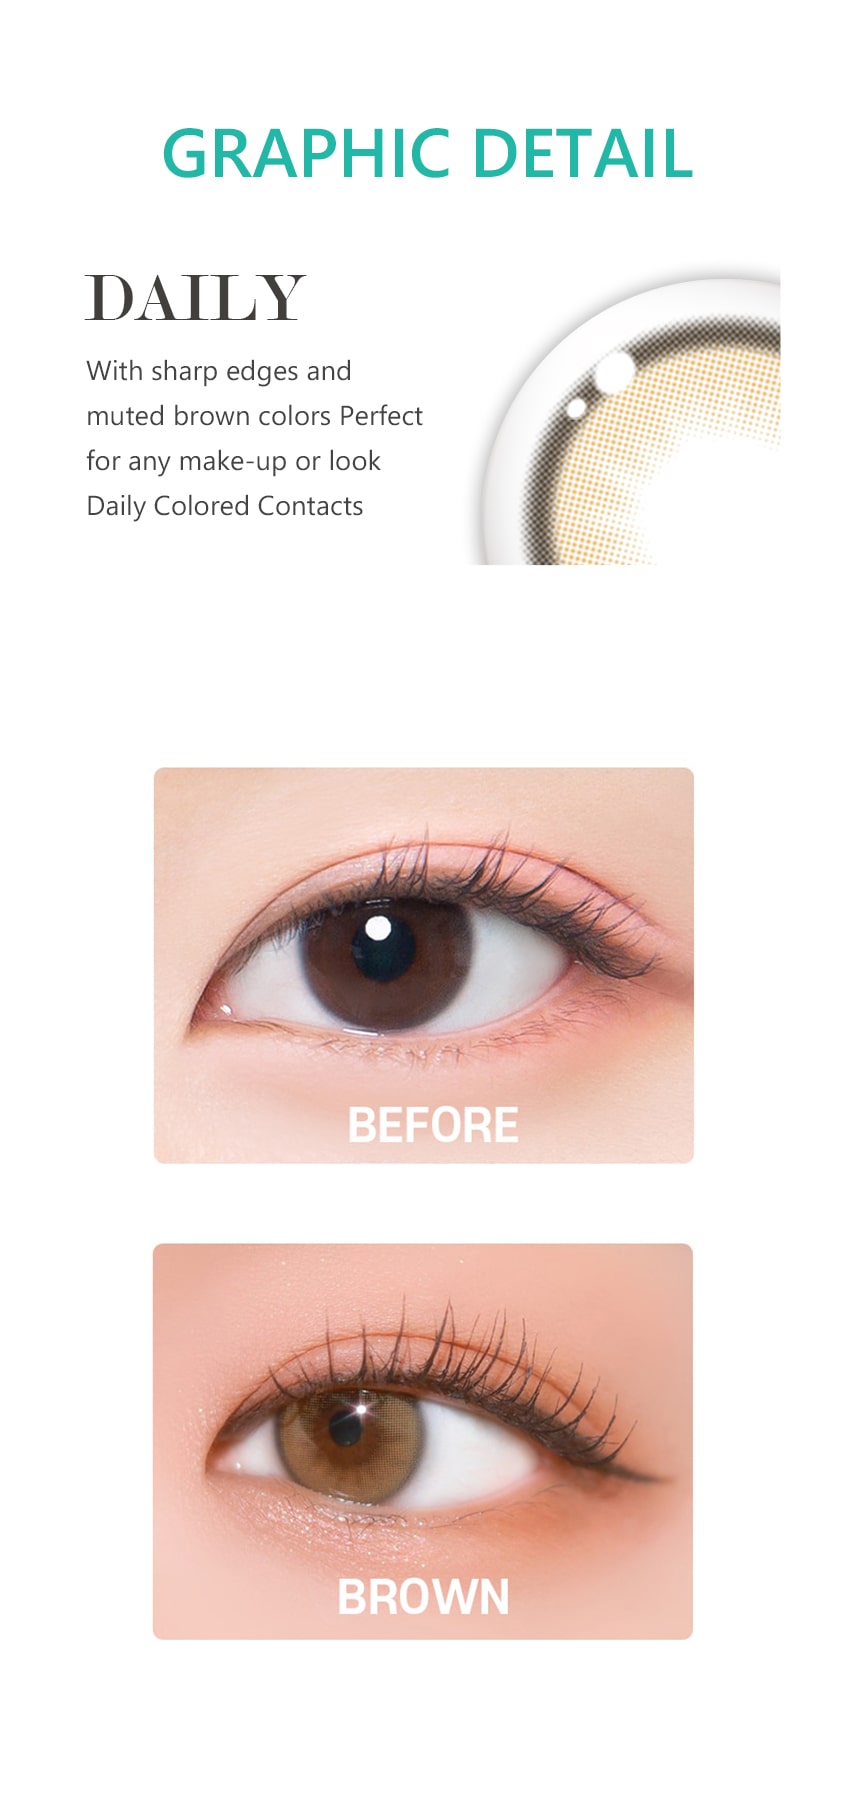 doonoon, URRING, Suzy, Brown, siliconehydrogel, 1 year, for astigmatism, popular colored contacts, Korean idol colored contacts